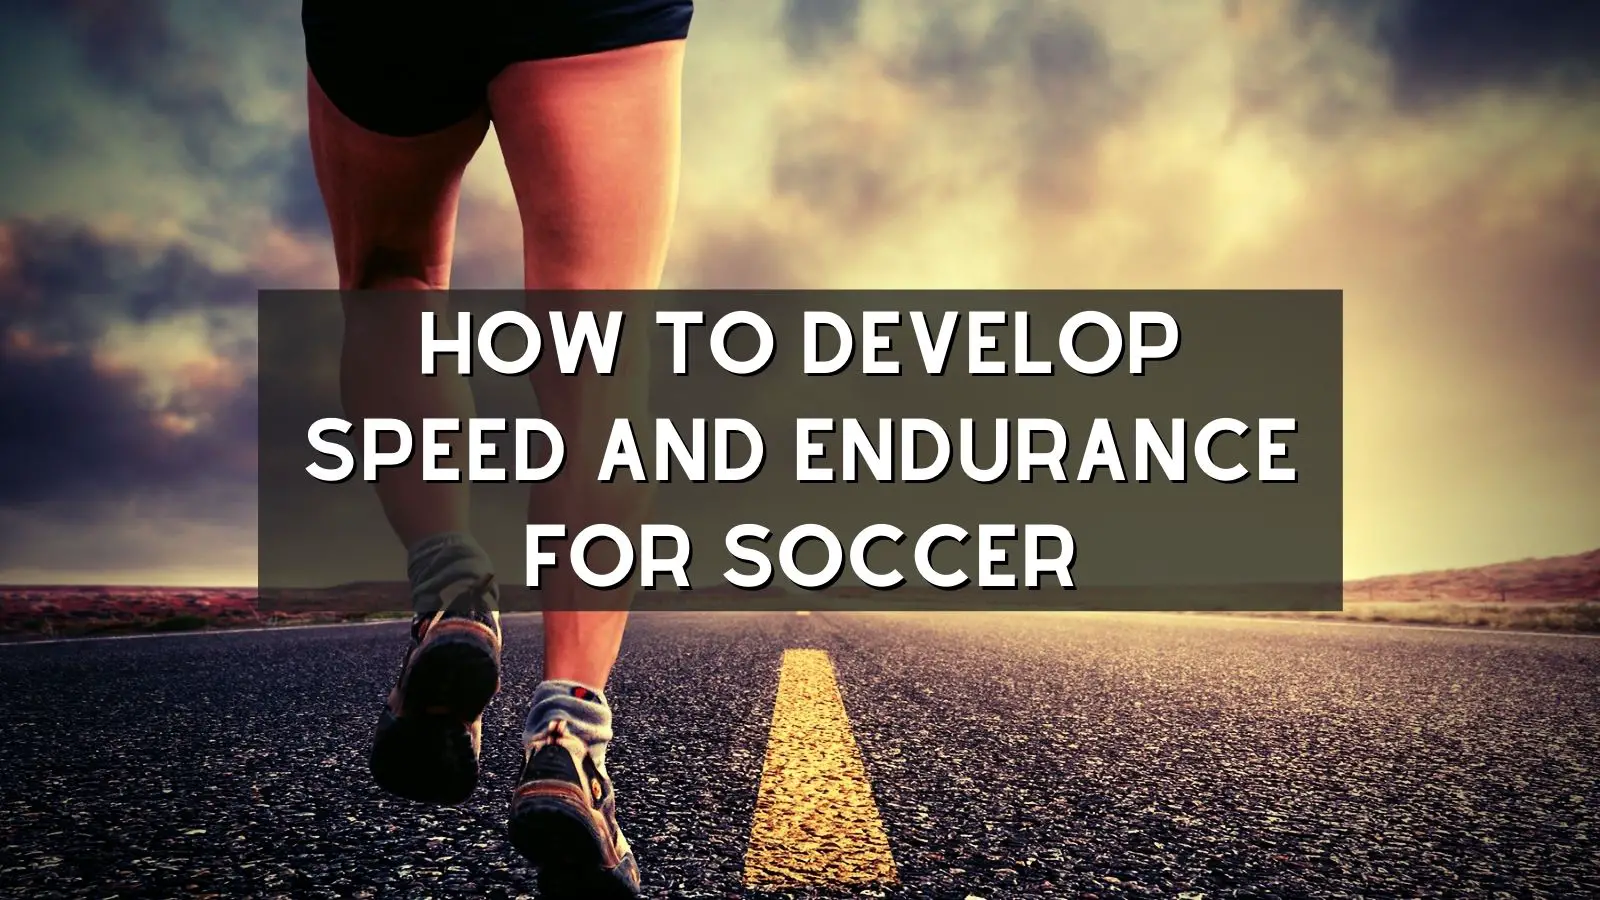 How To Develop Speed And Endurance For Soccer